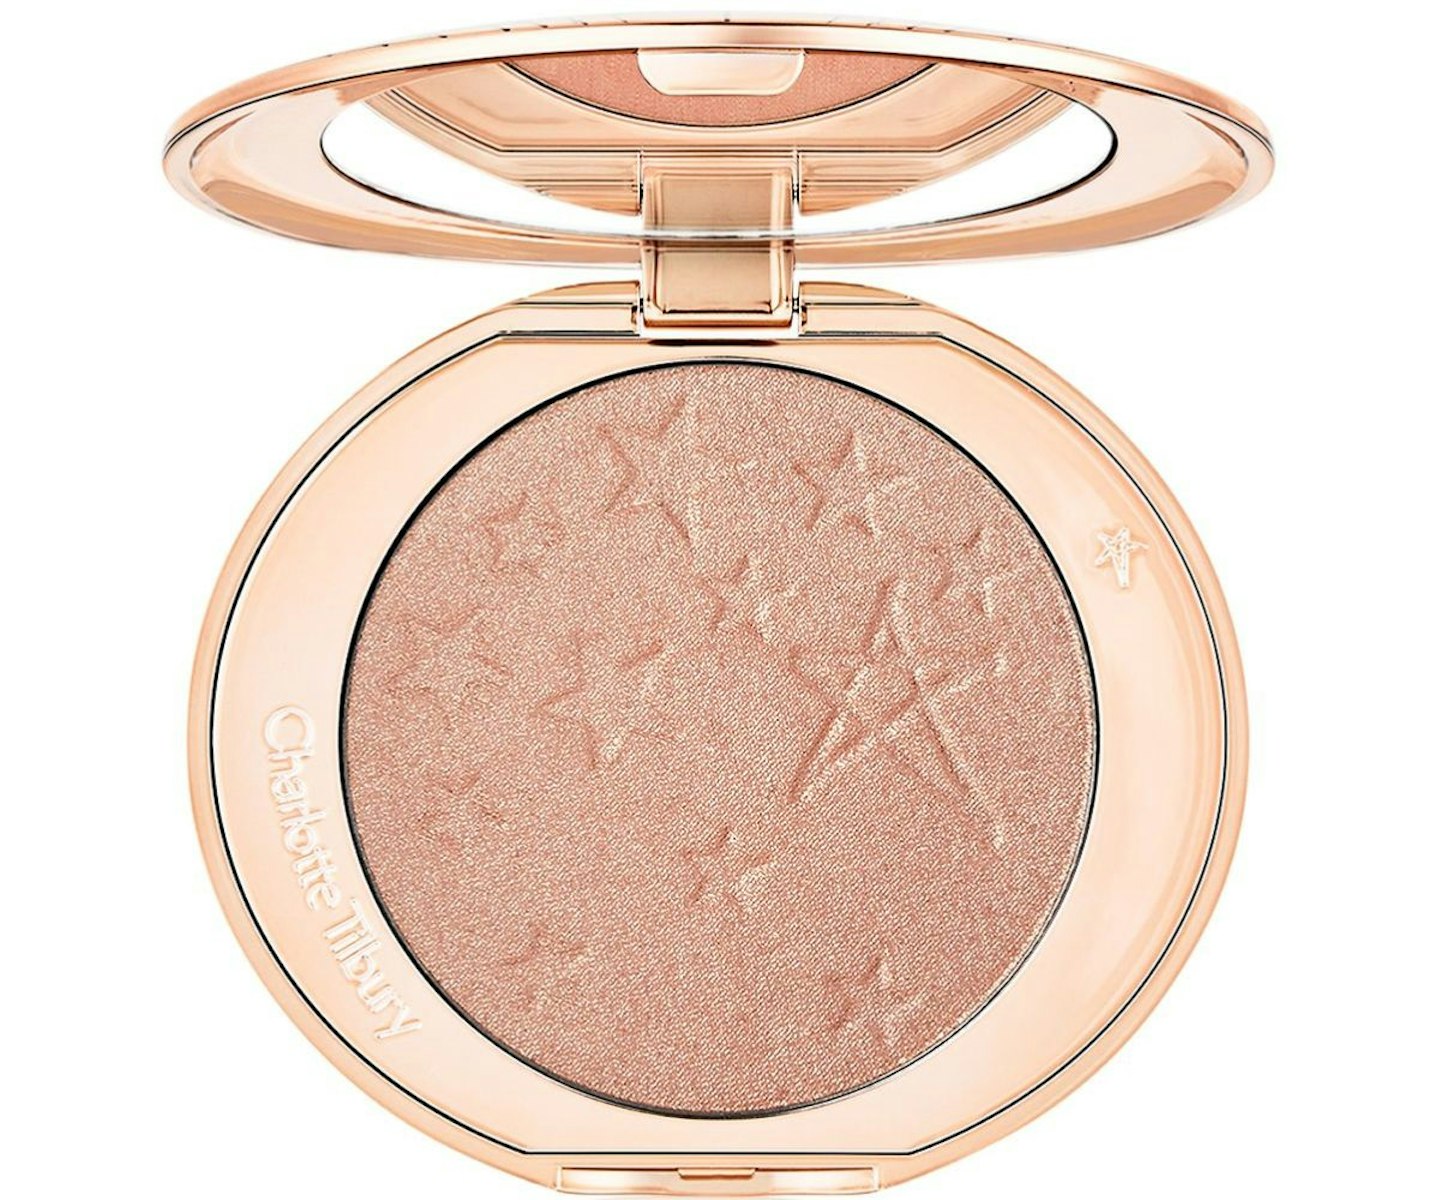 Charlotte Tilbury Hollywood Glow Glide Face Architect Highlighter - Pillowtalk Glow